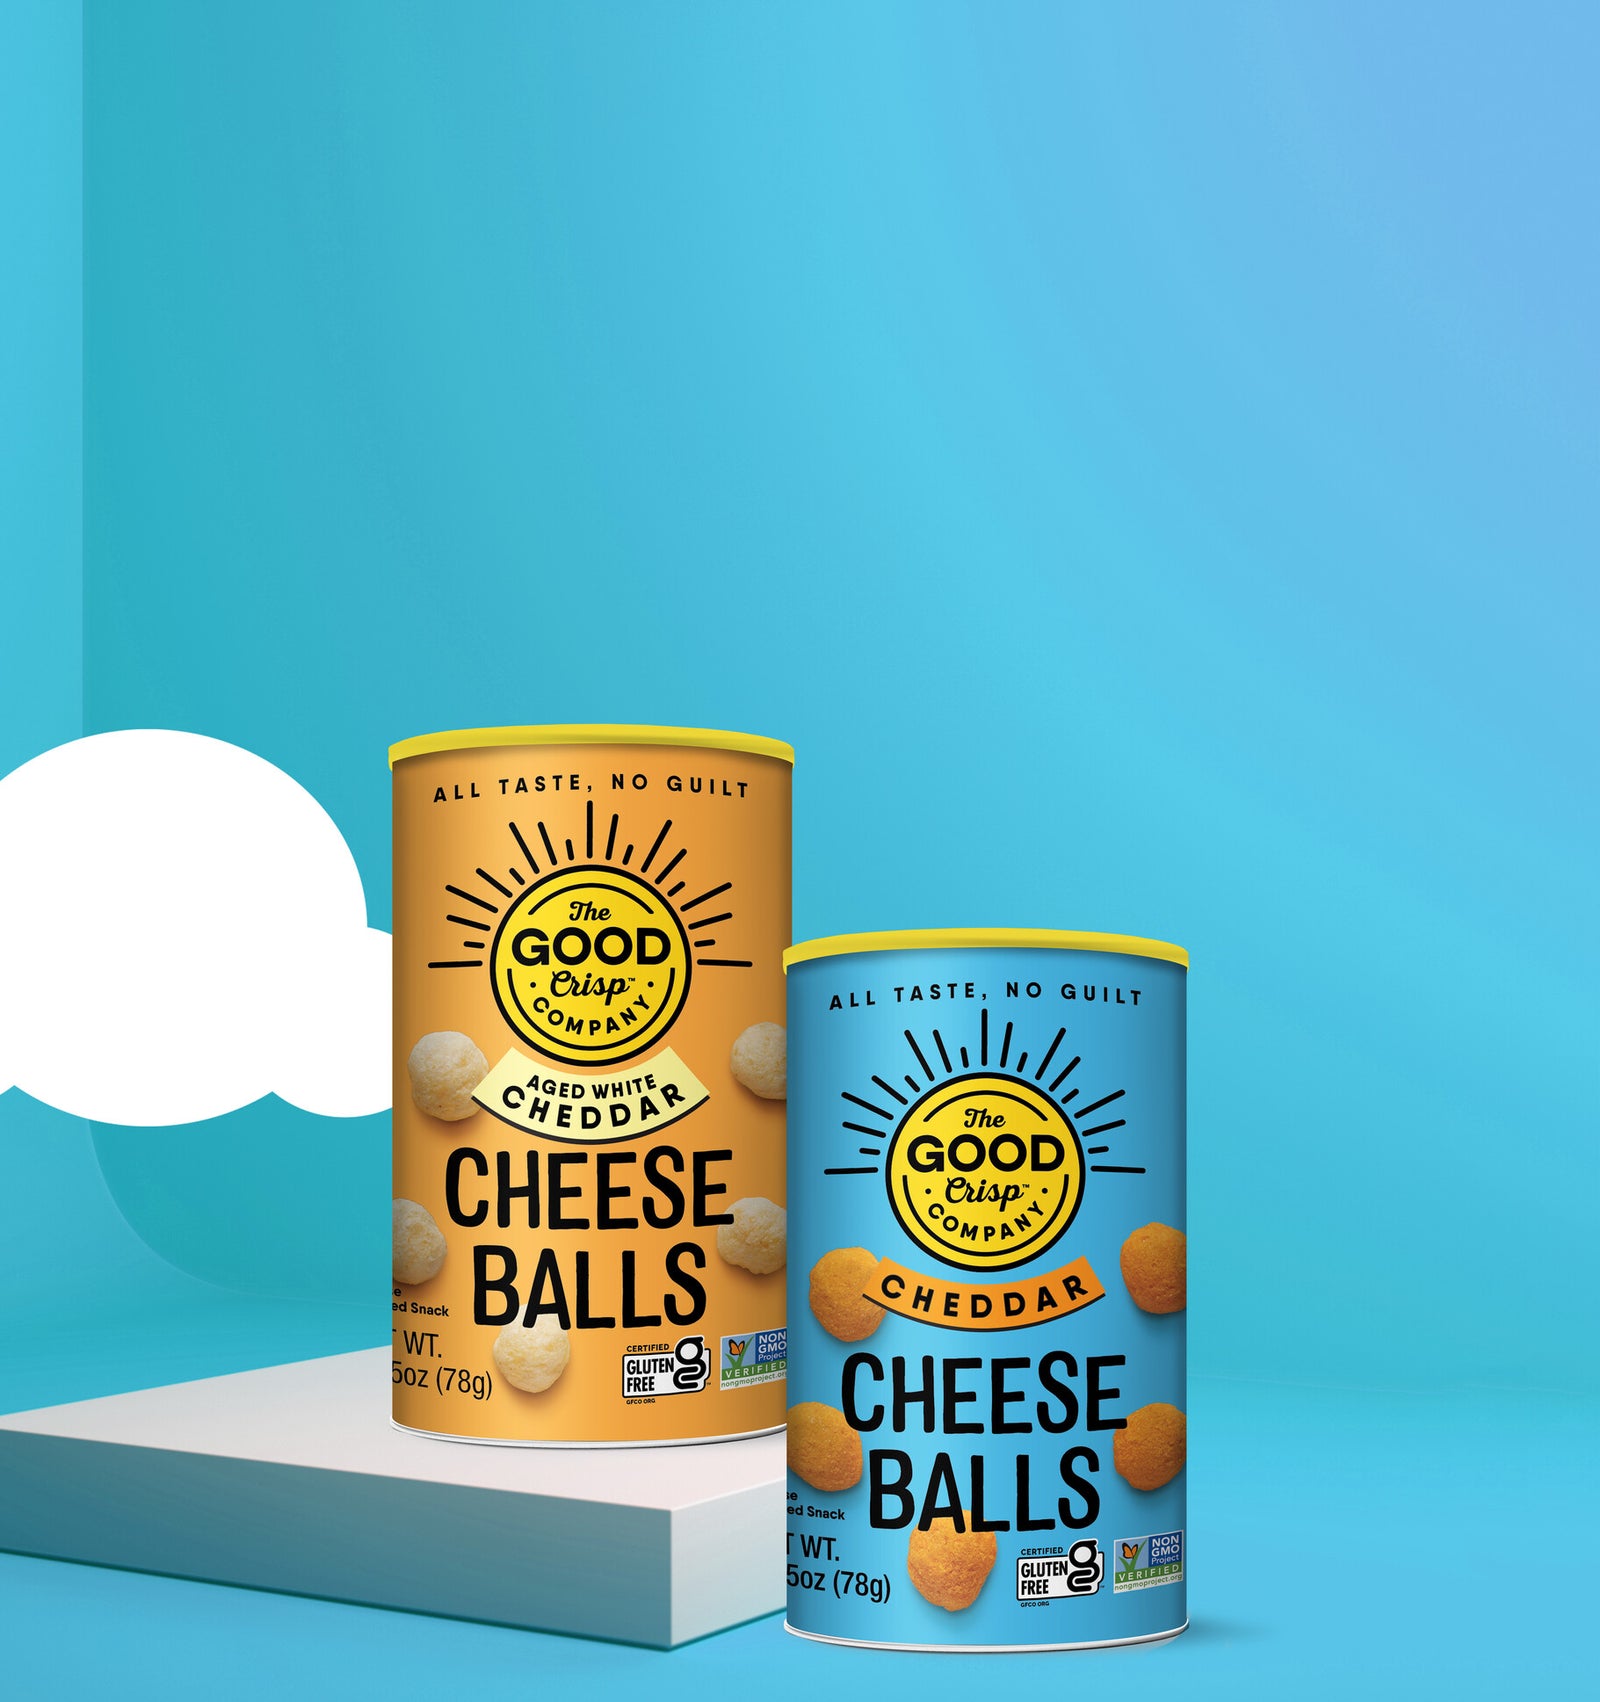 Aged White Cheddar Cheese Balls pack next to Cheddar Cheese Balls pack, with illustrated cloud in background